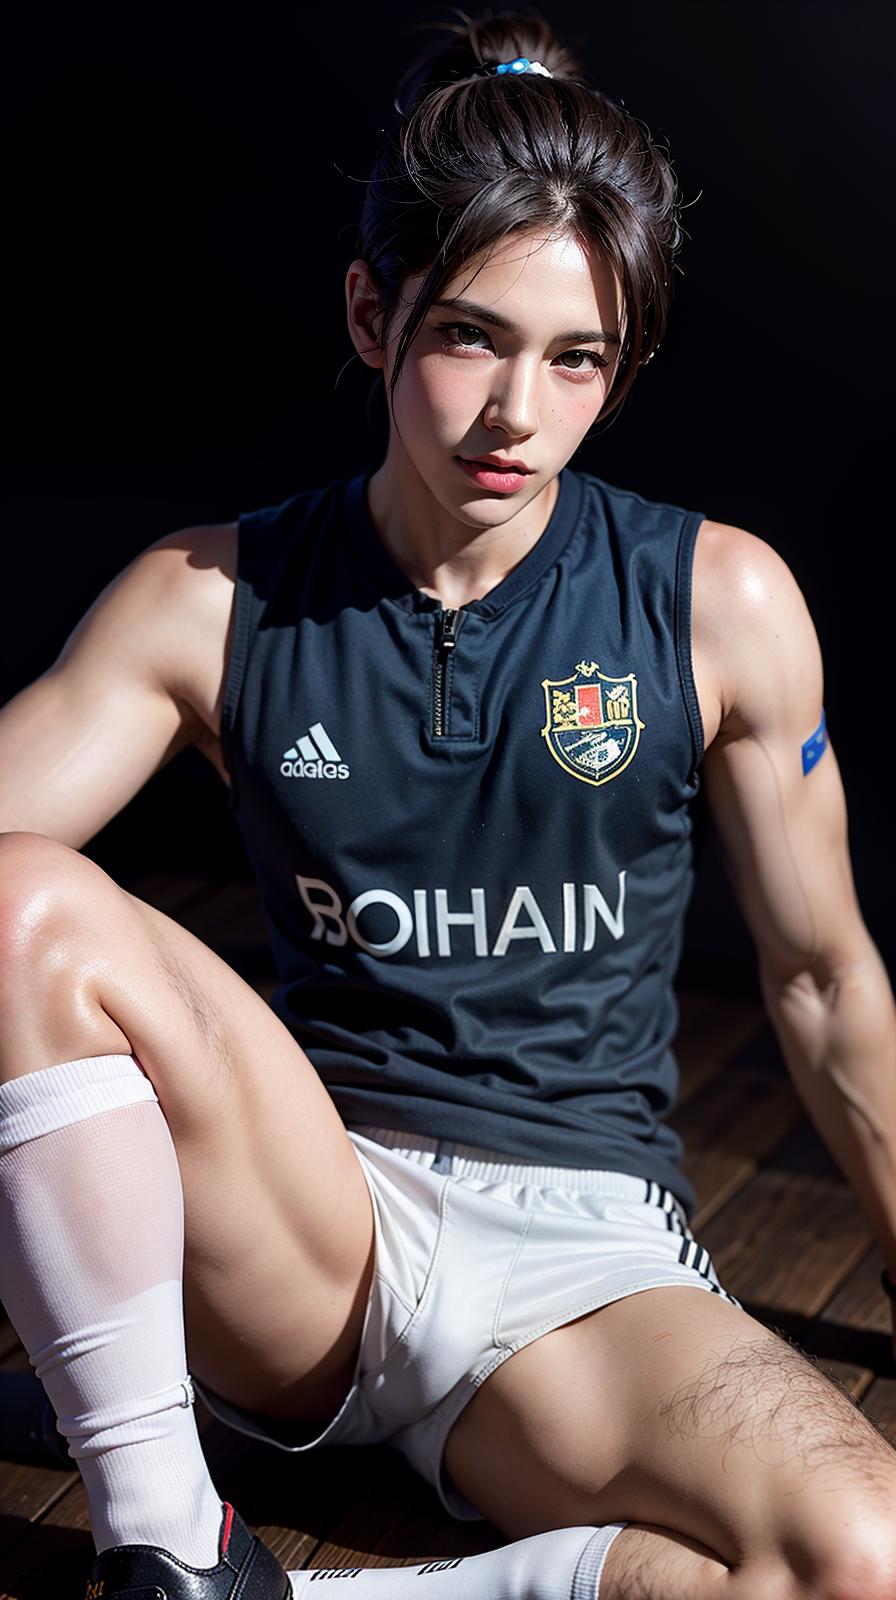  ultra high res, (photorealistic:1.4), raw photo, (realistic face), realistic eyes, (realistic skin), <lora:XXMix9_v20LoRa:0.8>, (handsome:1.2), (male:2), (asian:1.6), (soccer players:1.2), (short hair:1.2), (pompadour:1.3), (white briefs:1.3), (sleeveless:1.2), spike shoes, (soccer shin guards:1.3), young, sitting posture, (spread legs:1.1), real skin, (sexy posing:1.3), hot guy, (muscular:1.3), (naked:1.1), (bulge:1.1), trained calves, thigh, realistic, lifelike, high quality, photos taken with a single-lens reflex camera, (looking at the camera:1.2)